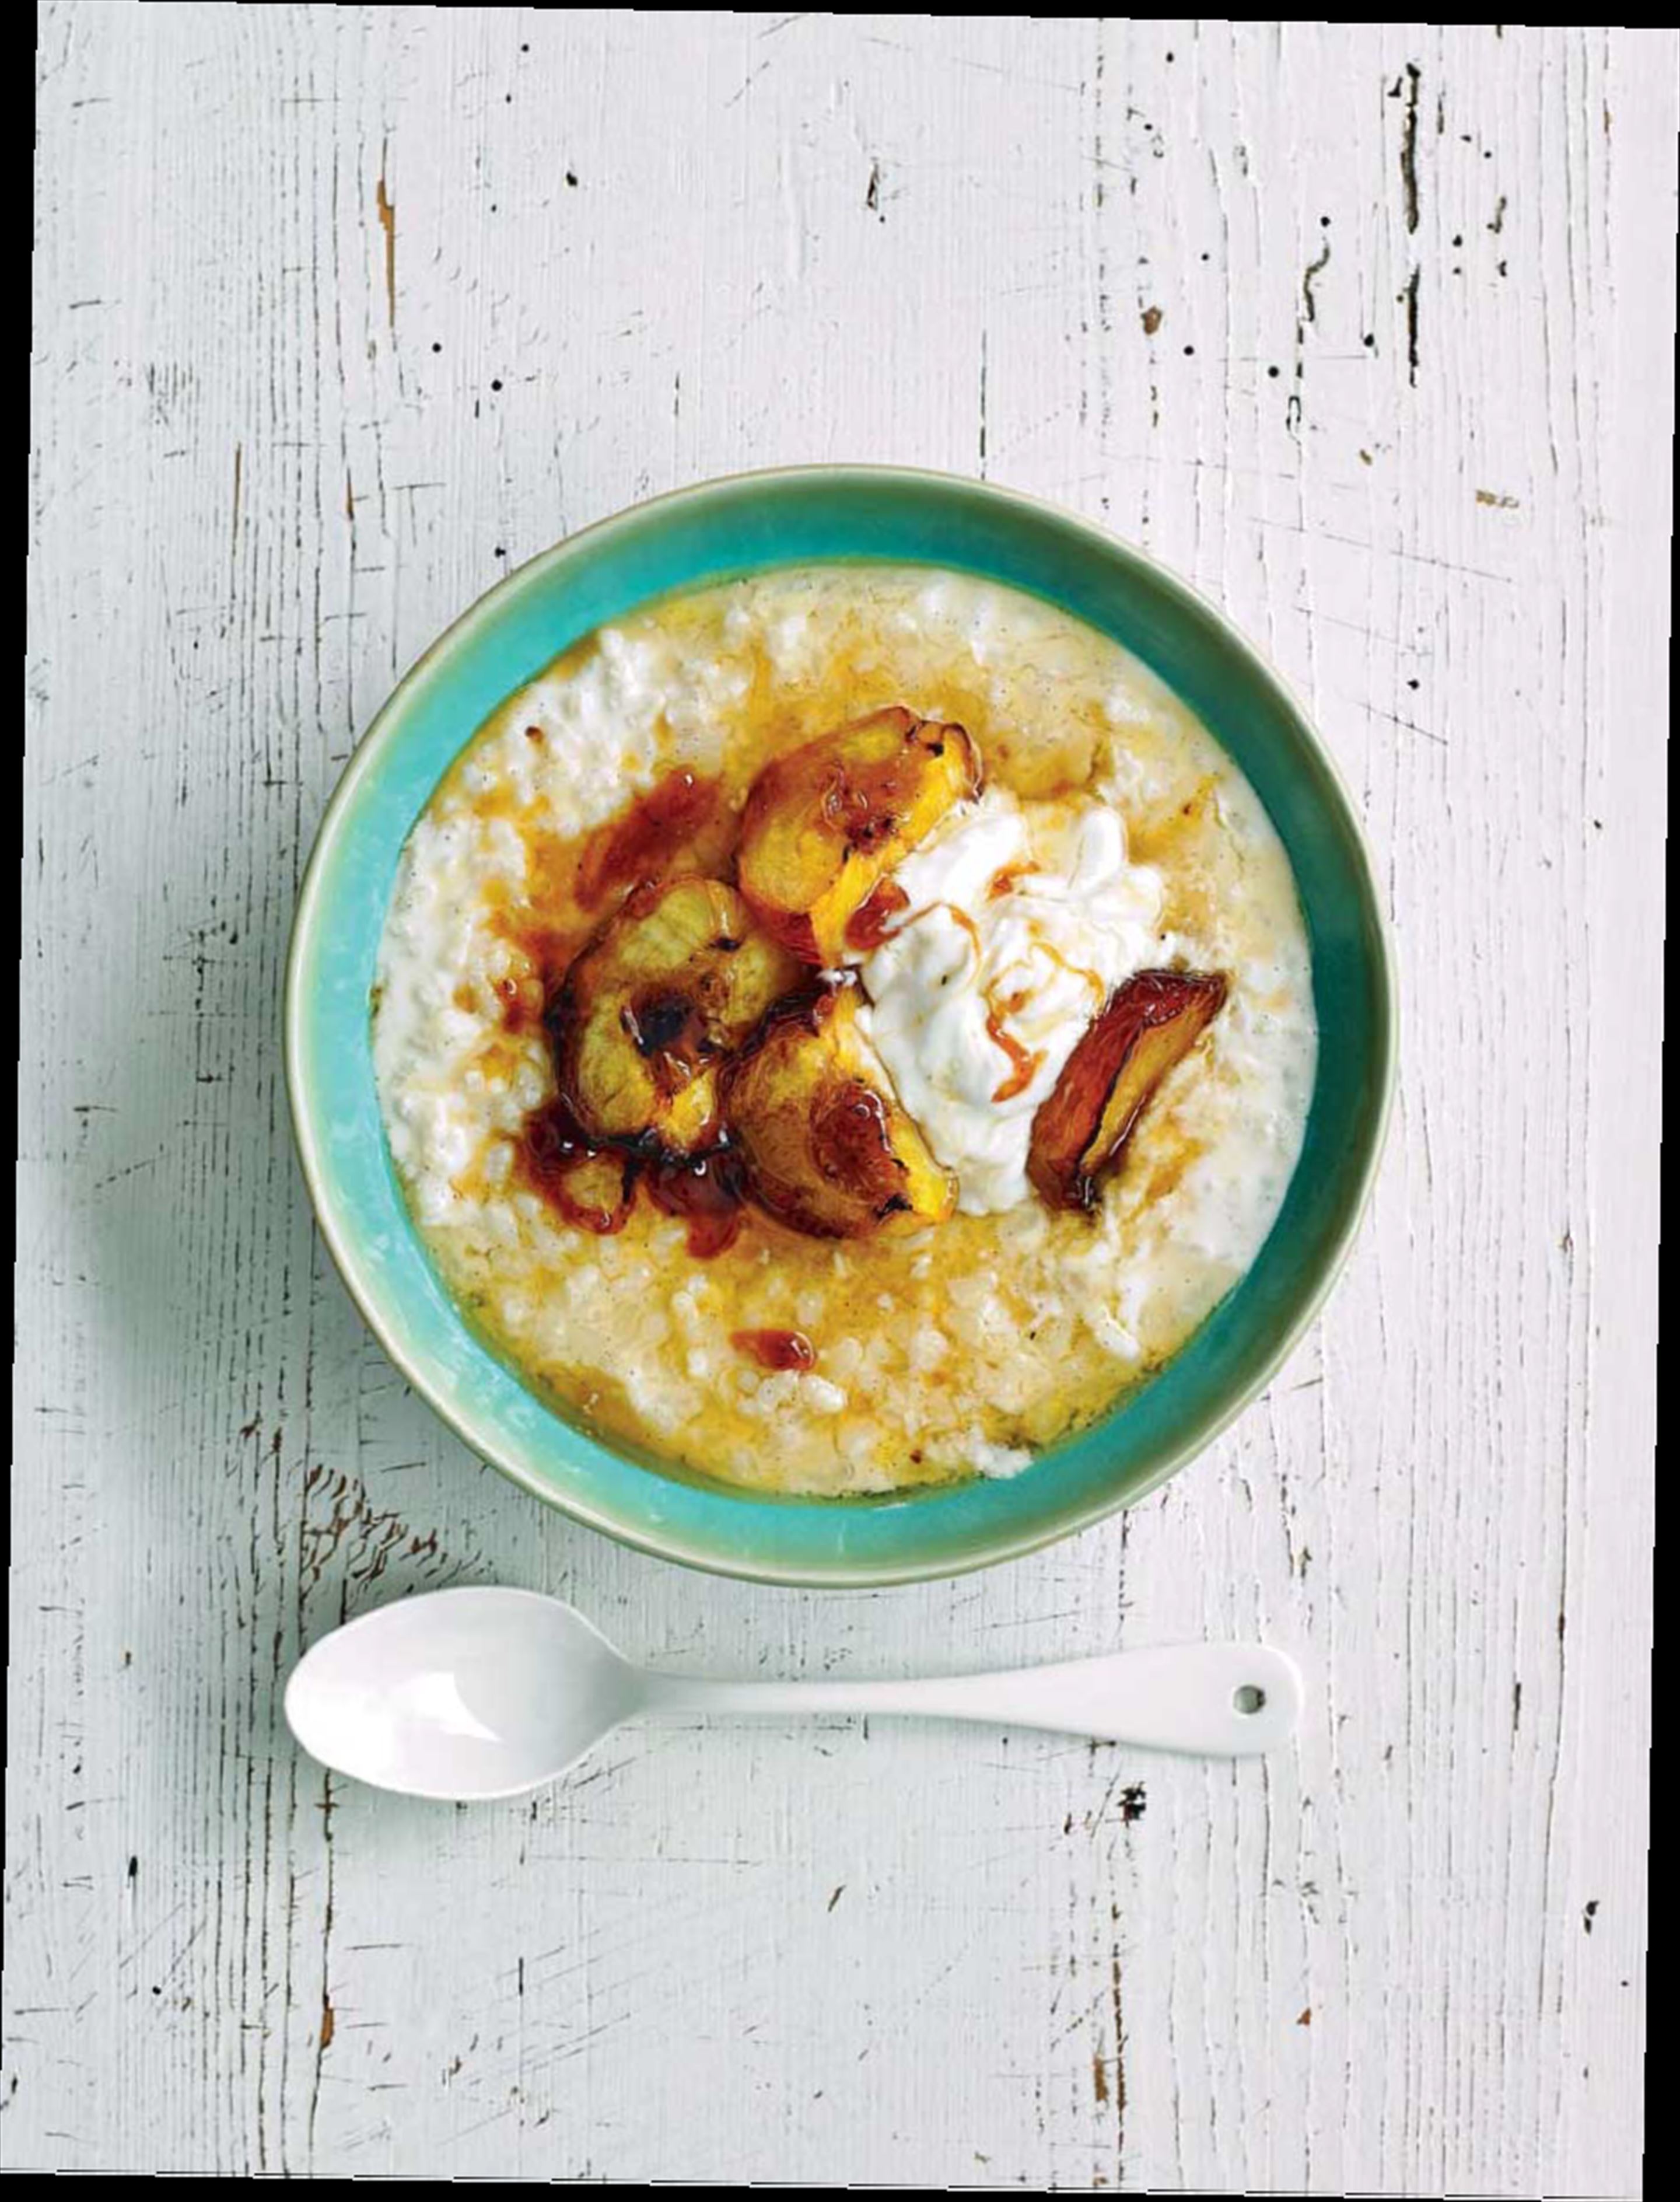 Roasted peaches with arroz con leche